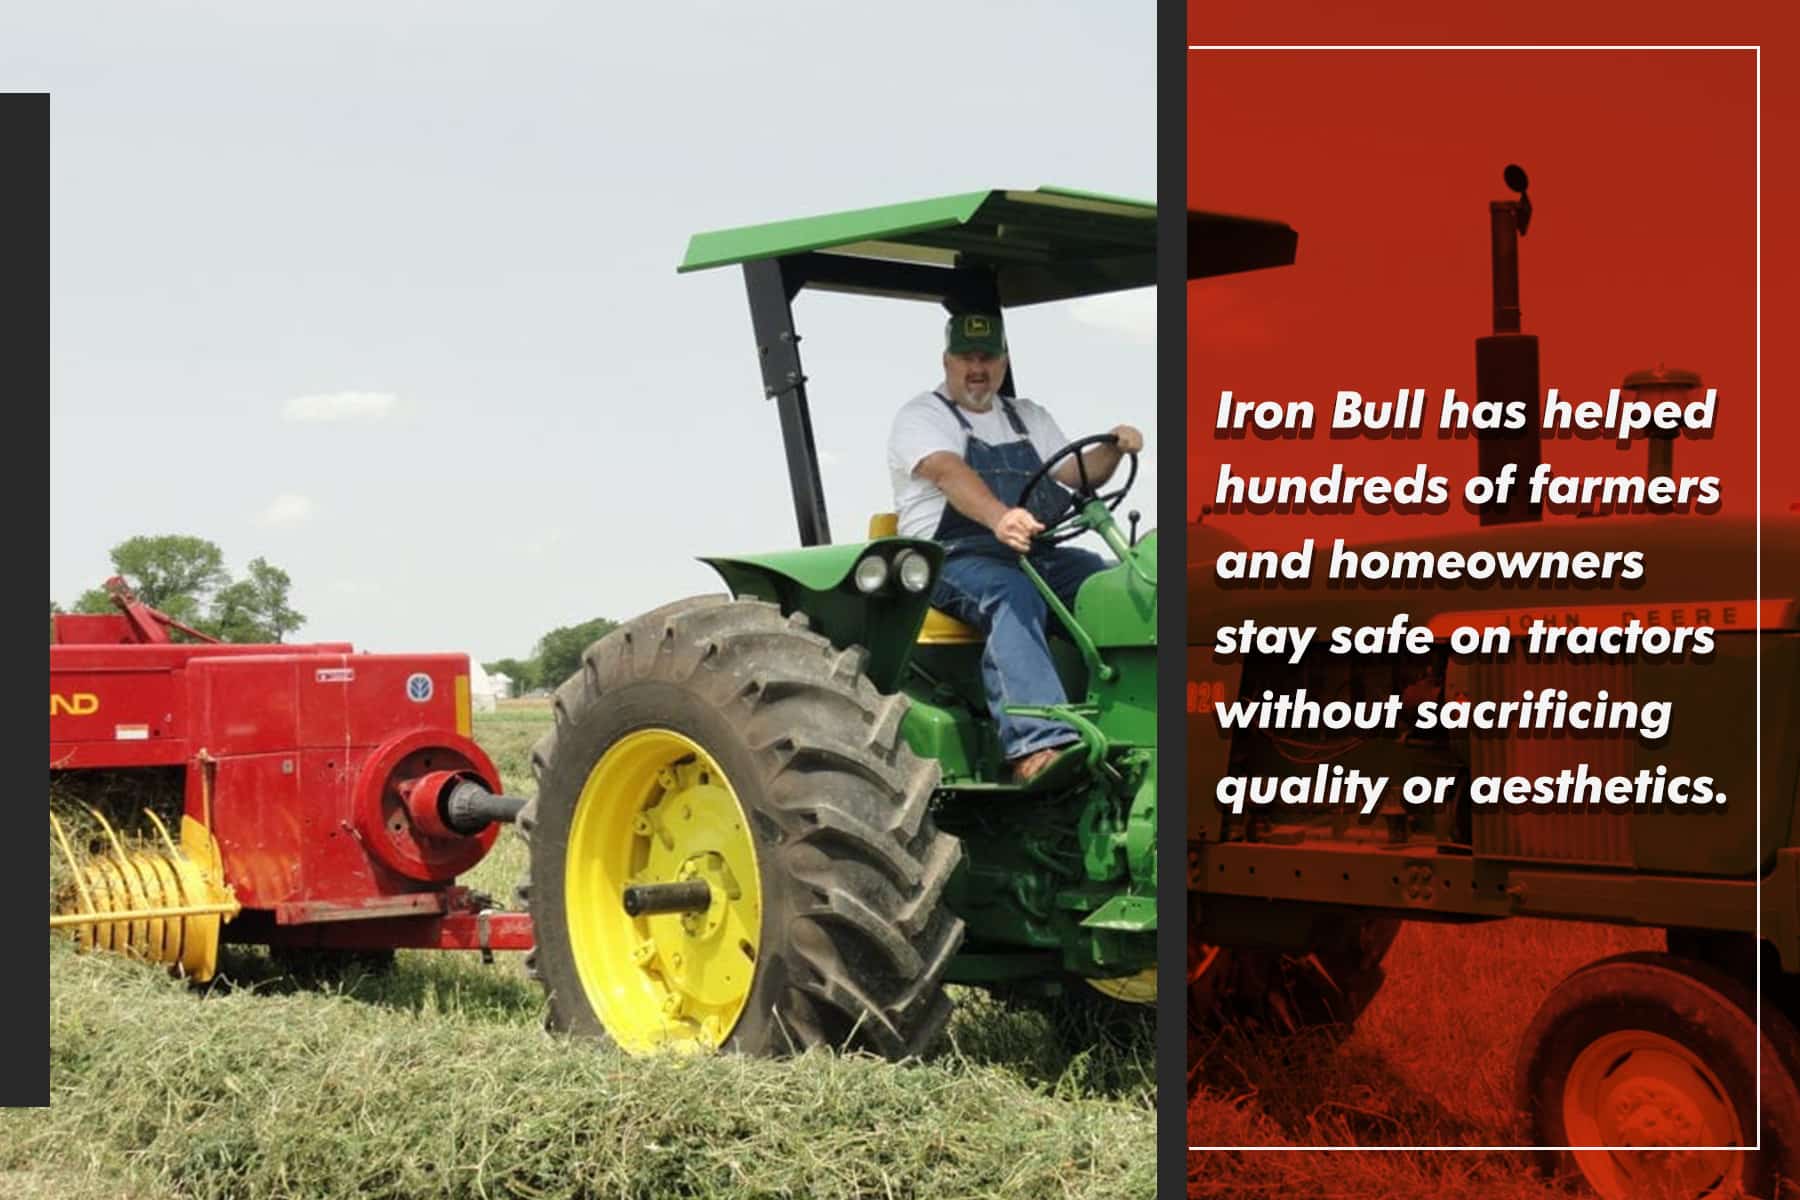 iron bull manufacturing has produces hundres of quality tractor canopies